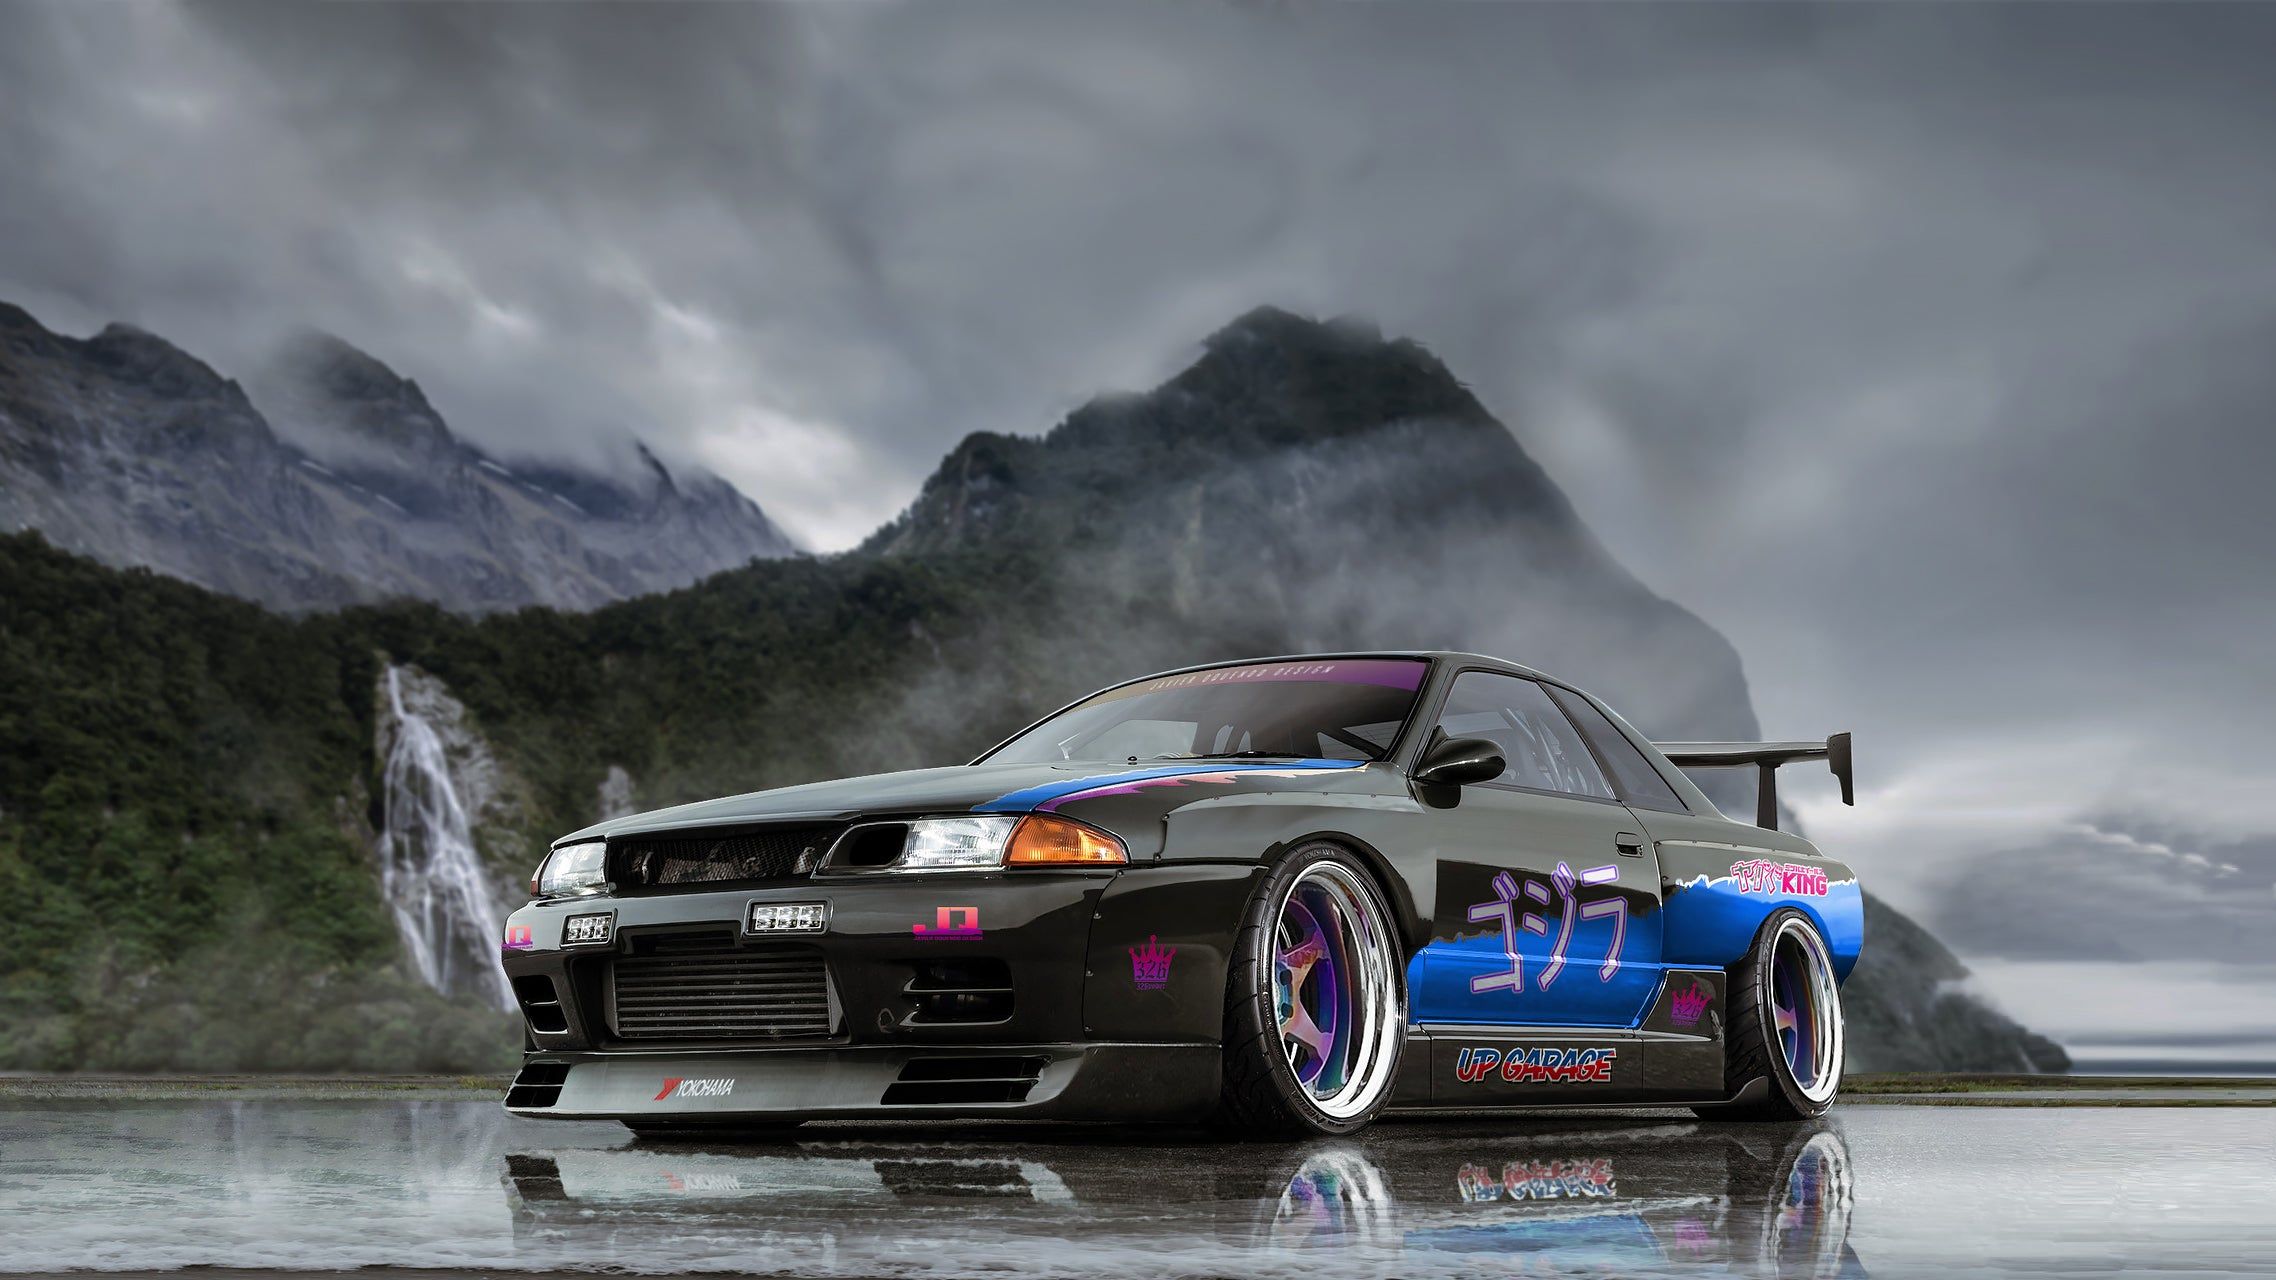 Jdm Cars Wallpaper 4K : 41 Jdm Hd Wallpapers Background Images Wallpaper Abyss